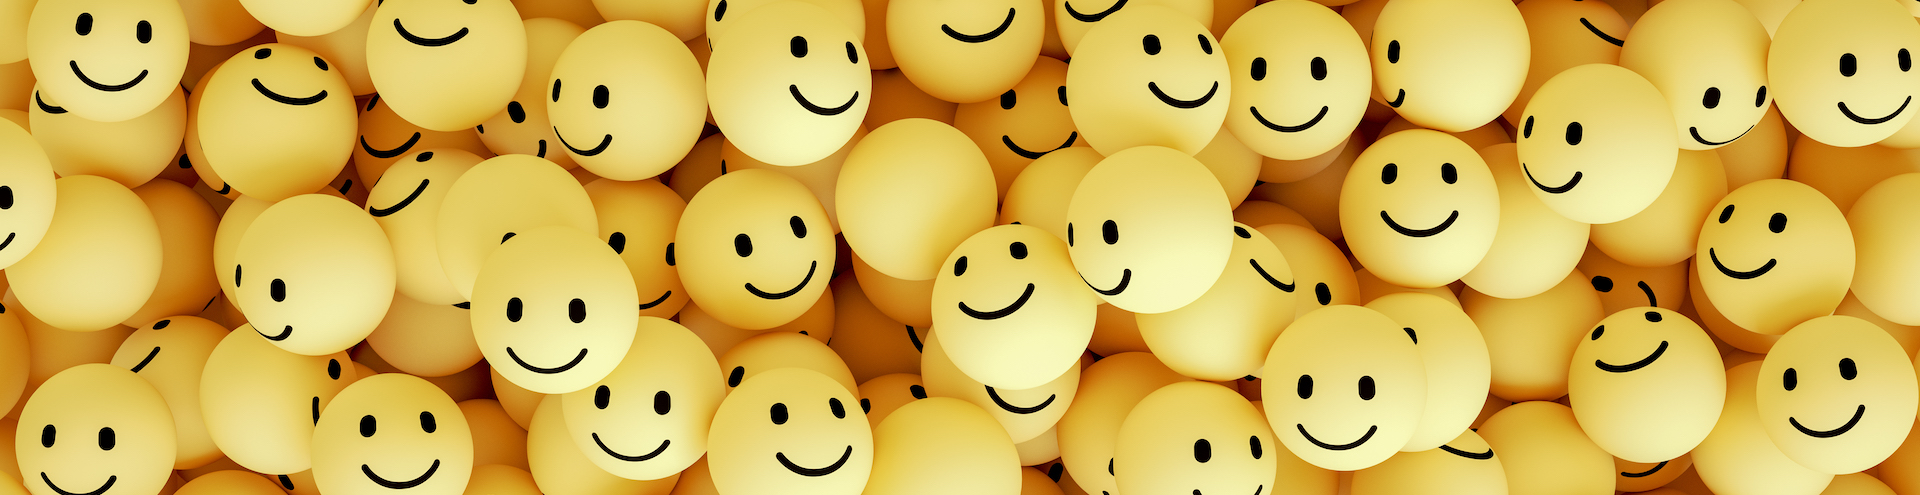 3D Emoji with Smiley Face